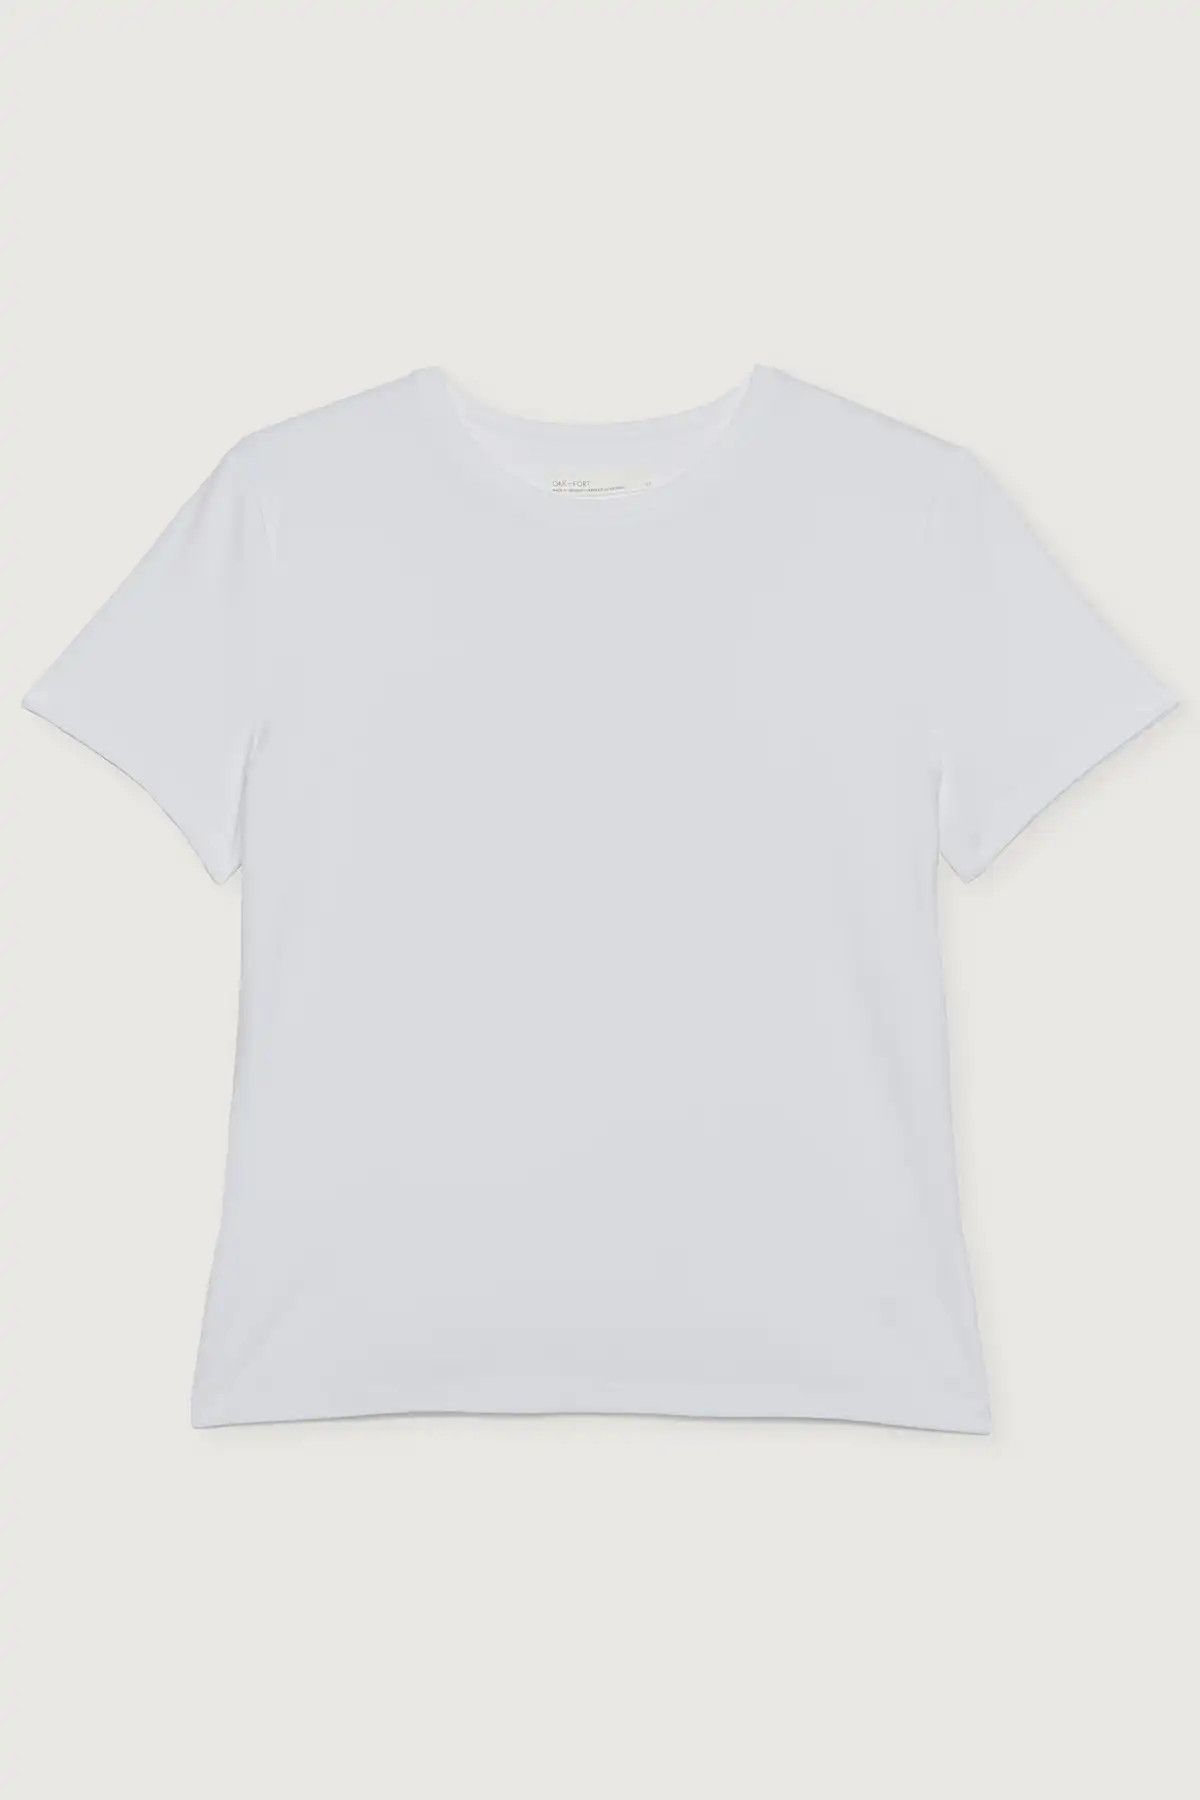 CLASSIC FIT T-SHIRT        4.8 star rating   15 Reviews          $34.00    
 CT-9832-W  White  Bl... | OAK + FORT